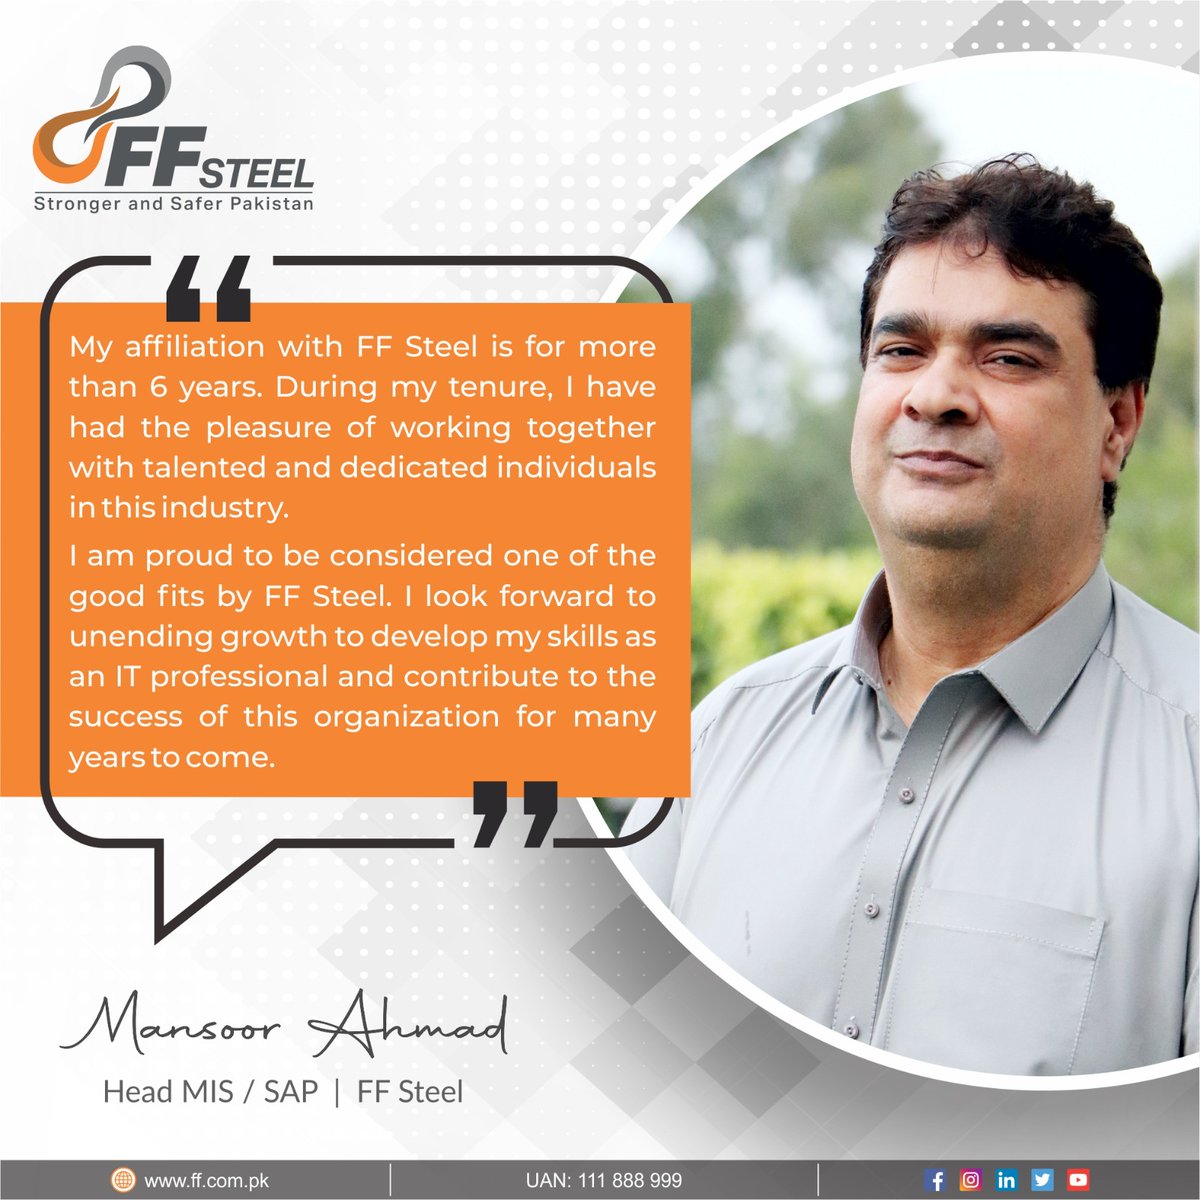 Our people are the heart of our organization, who tirelessly work with utmost dedication and passion. Here are some thoughts shared by Mr. Mansoor Ahmad about being a part of the FF Team.
#employee #employeeappreciation  #employeetestimonial #StrongerAndSafer #Pakistan